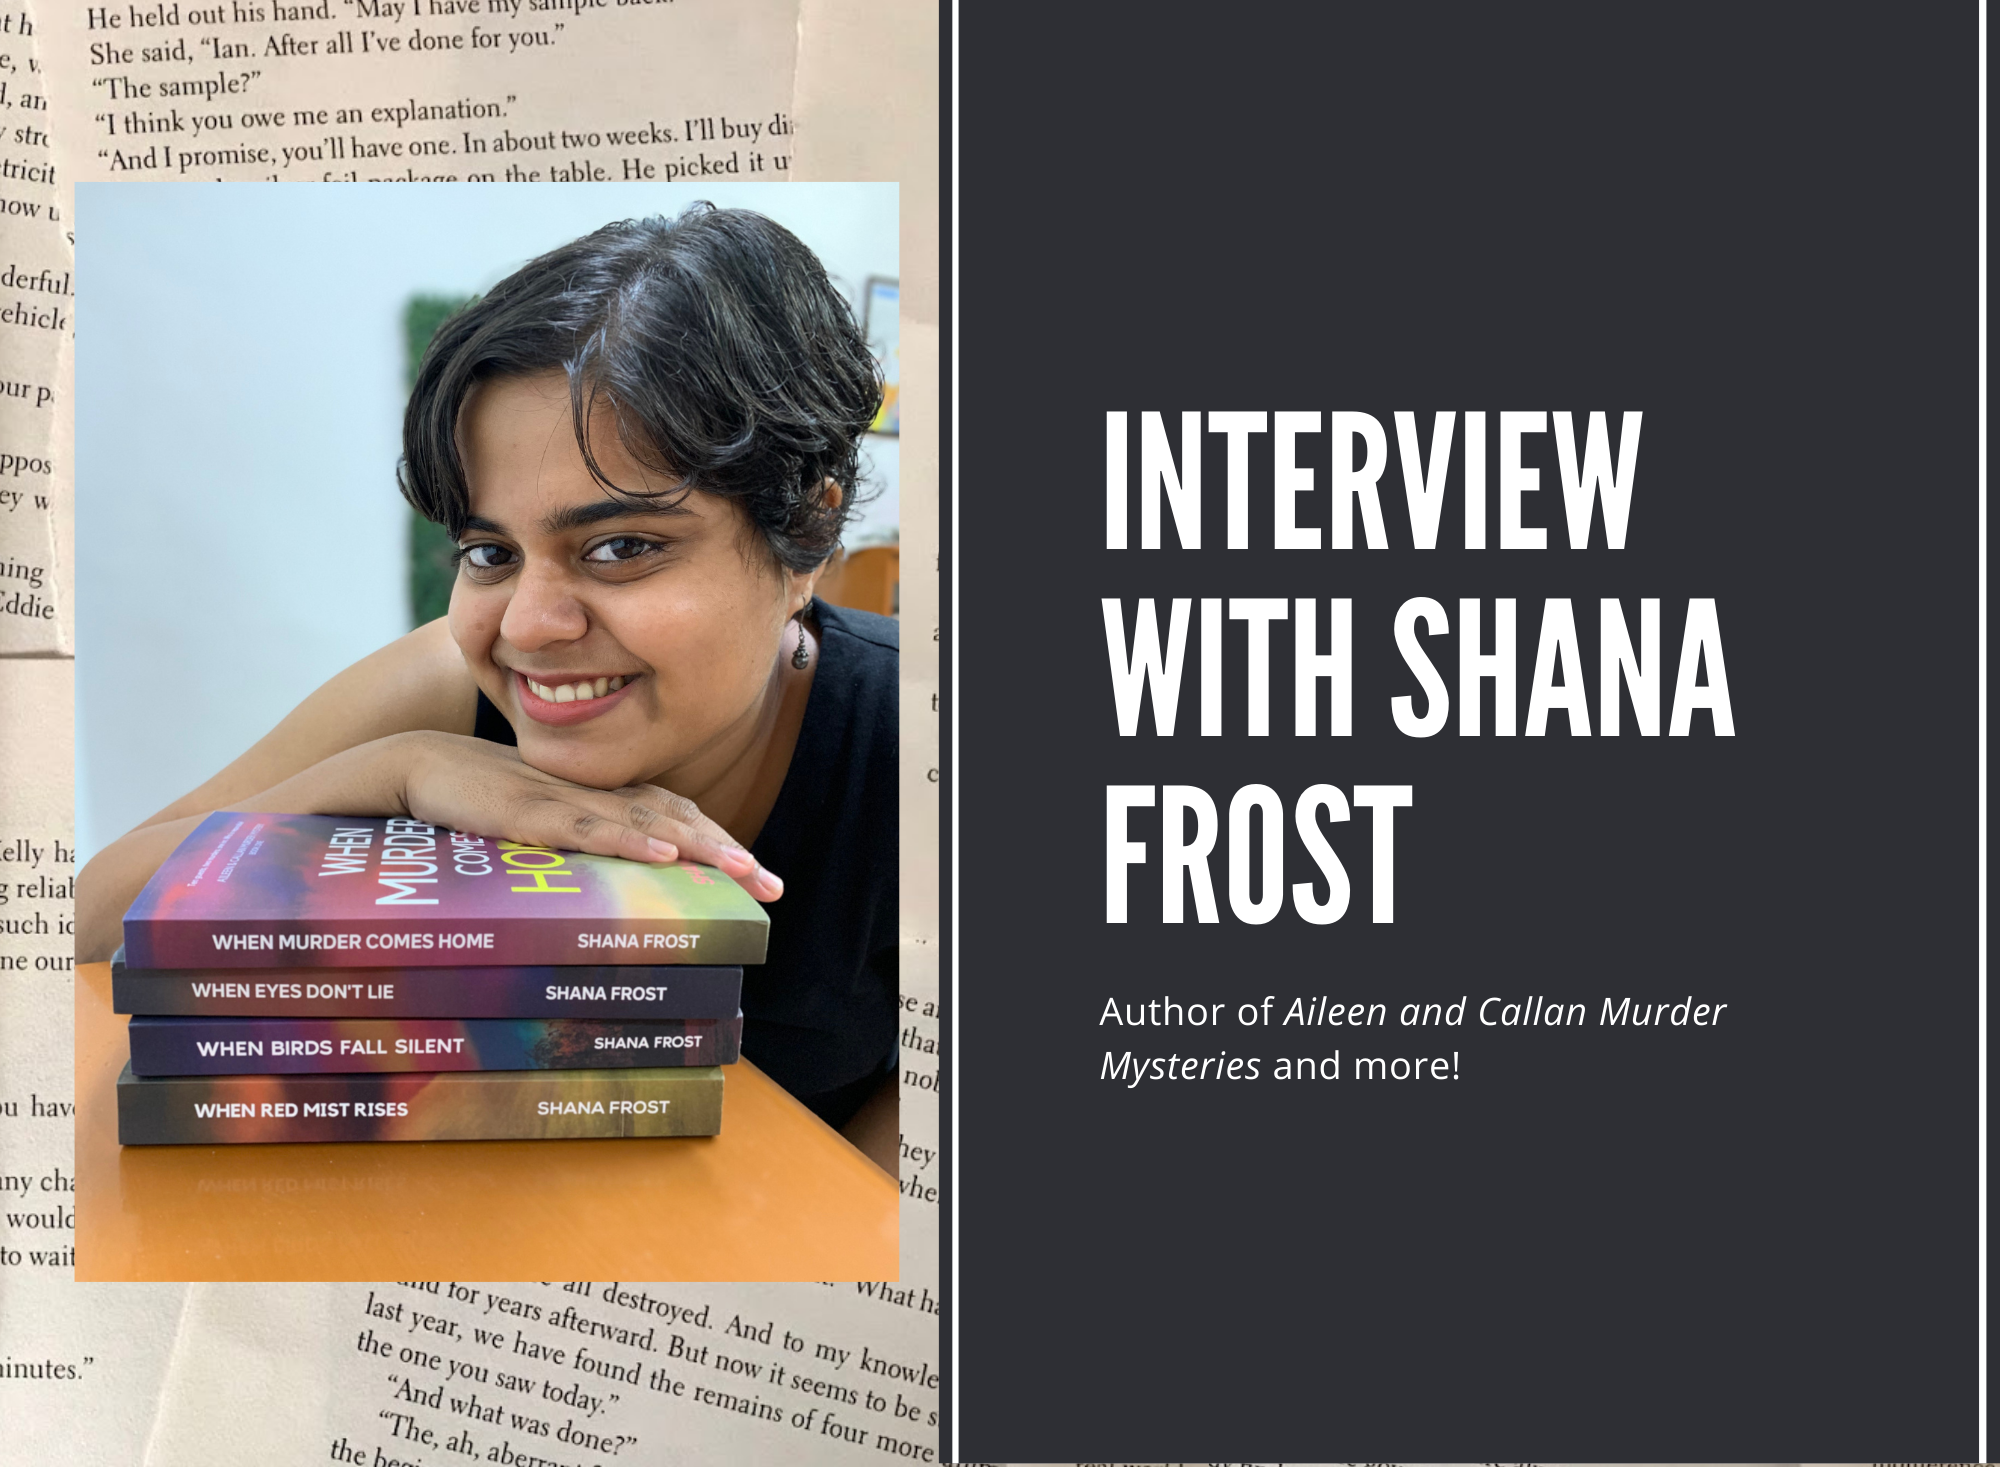 Interview with Shana Frost